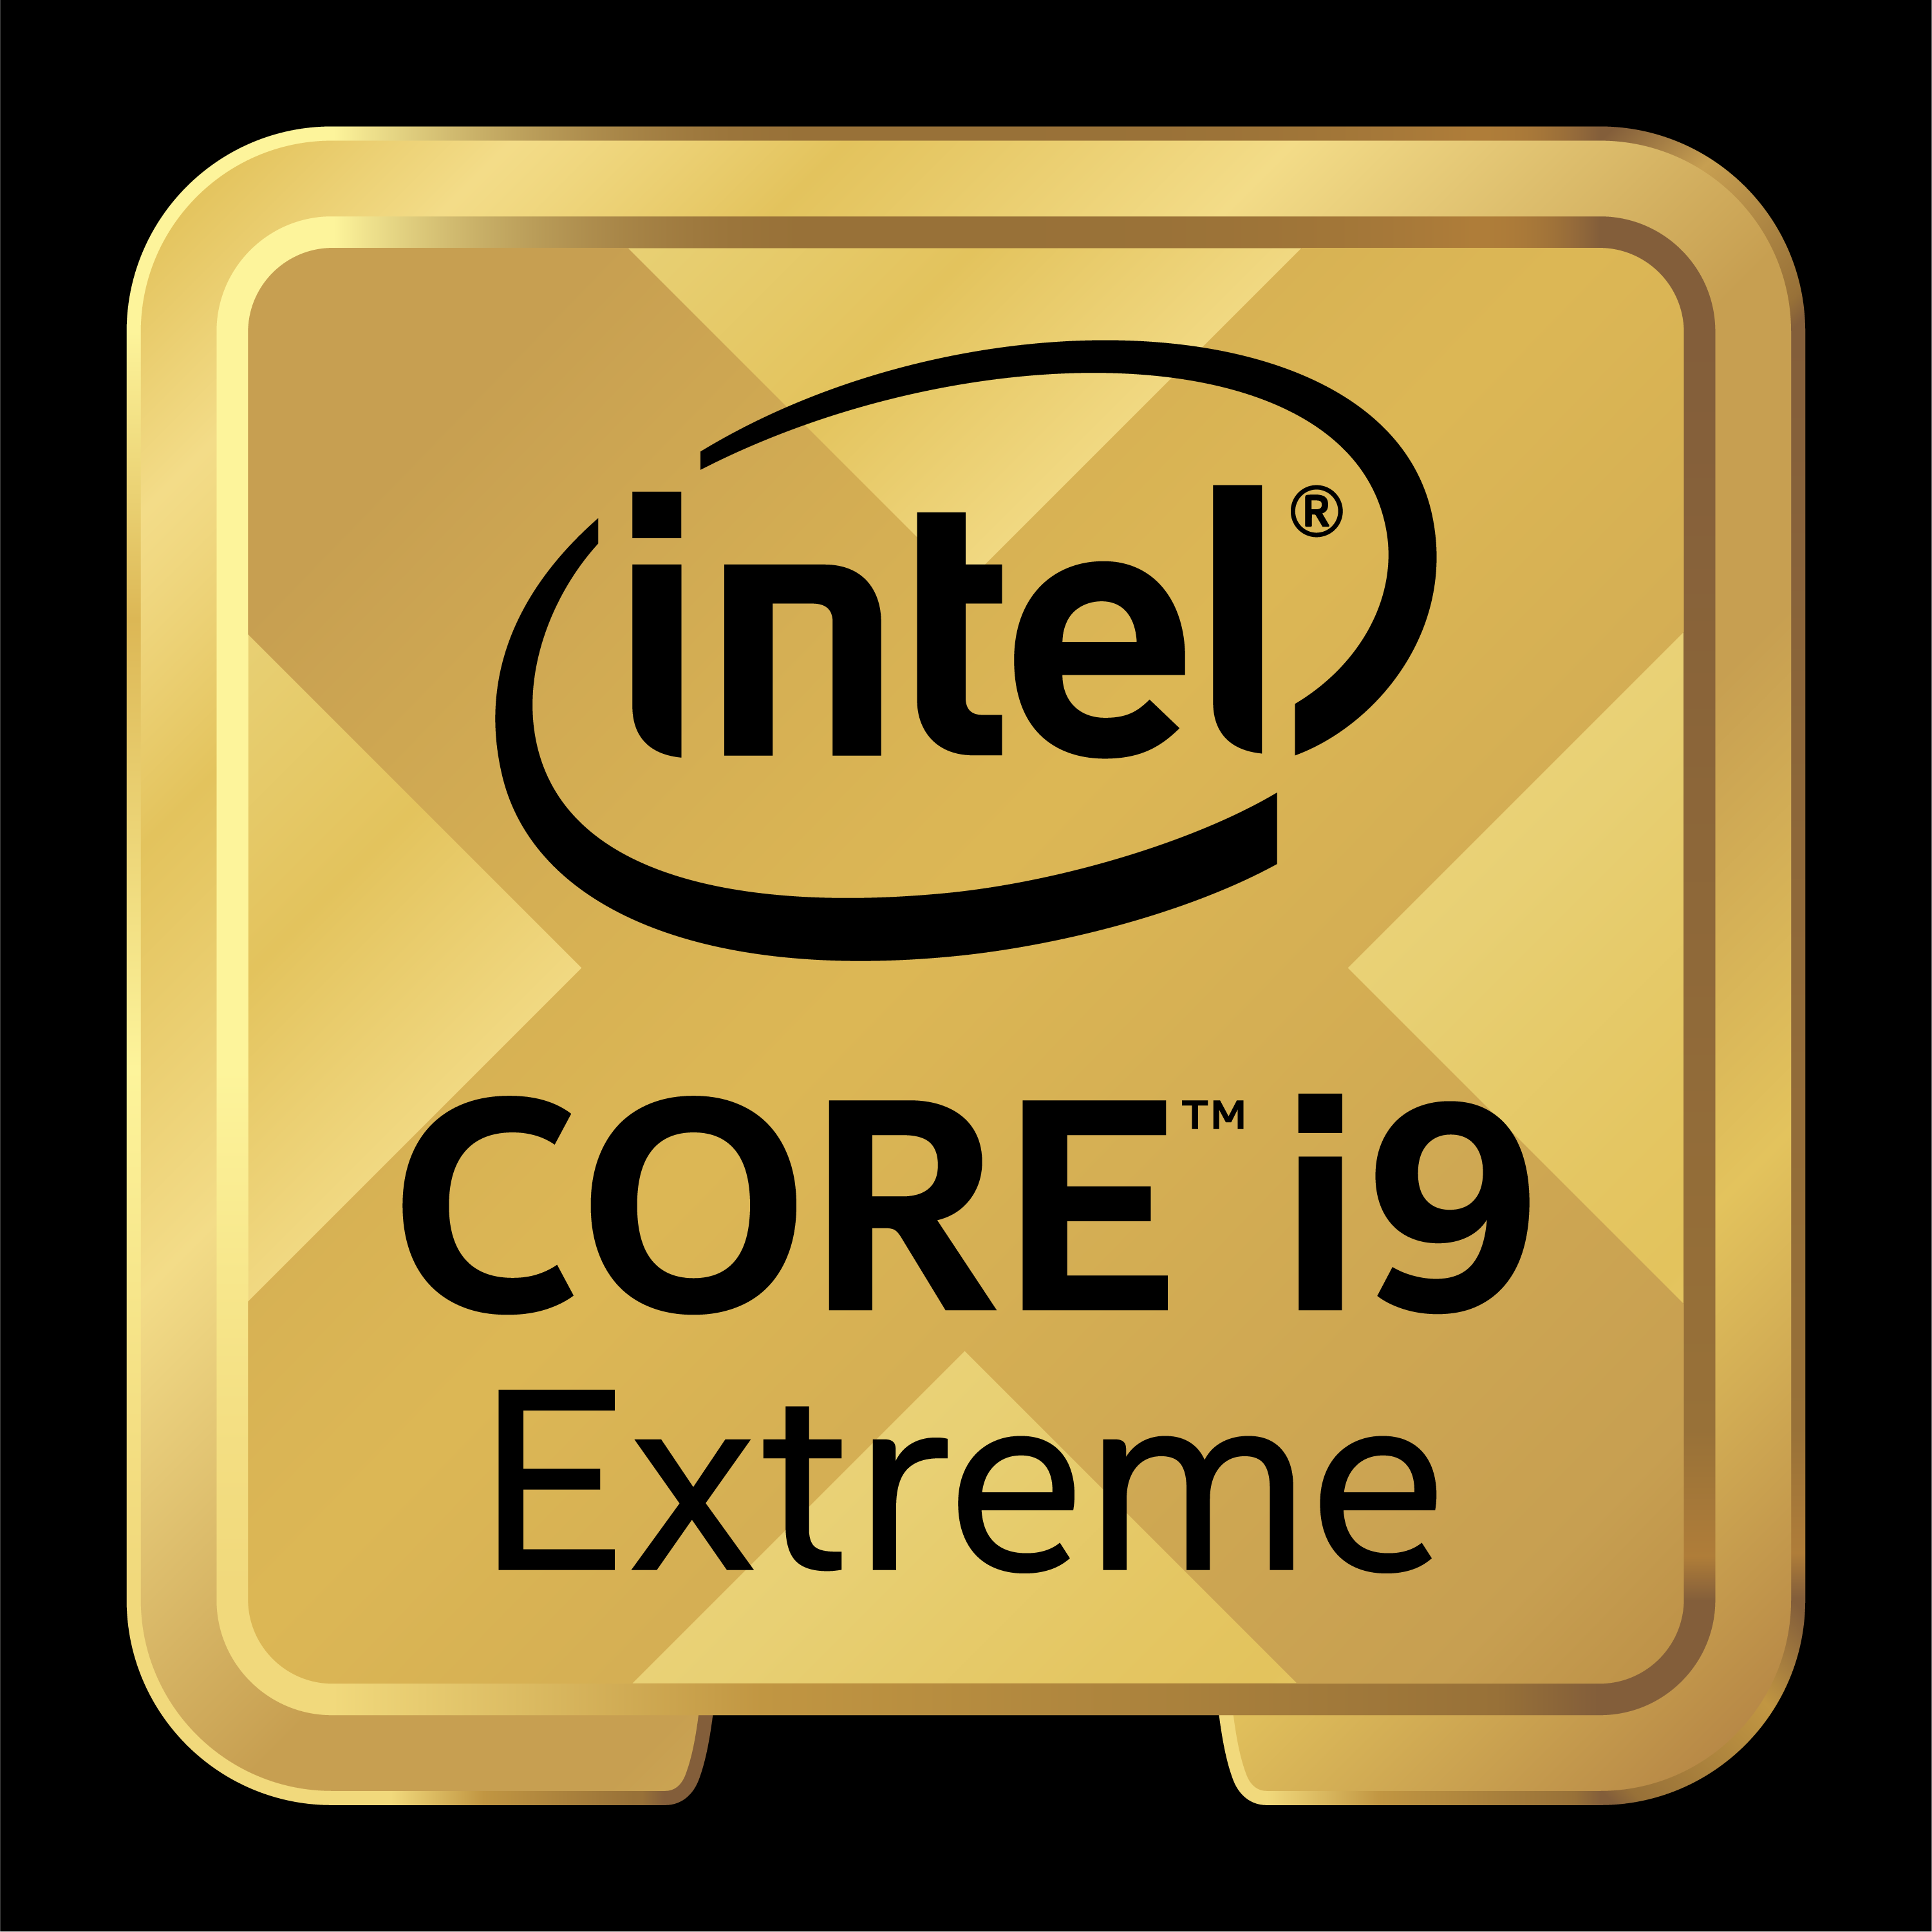 Intel Core i9 Extreme Edition 10980XE X-series 3 GHz 18-core 36